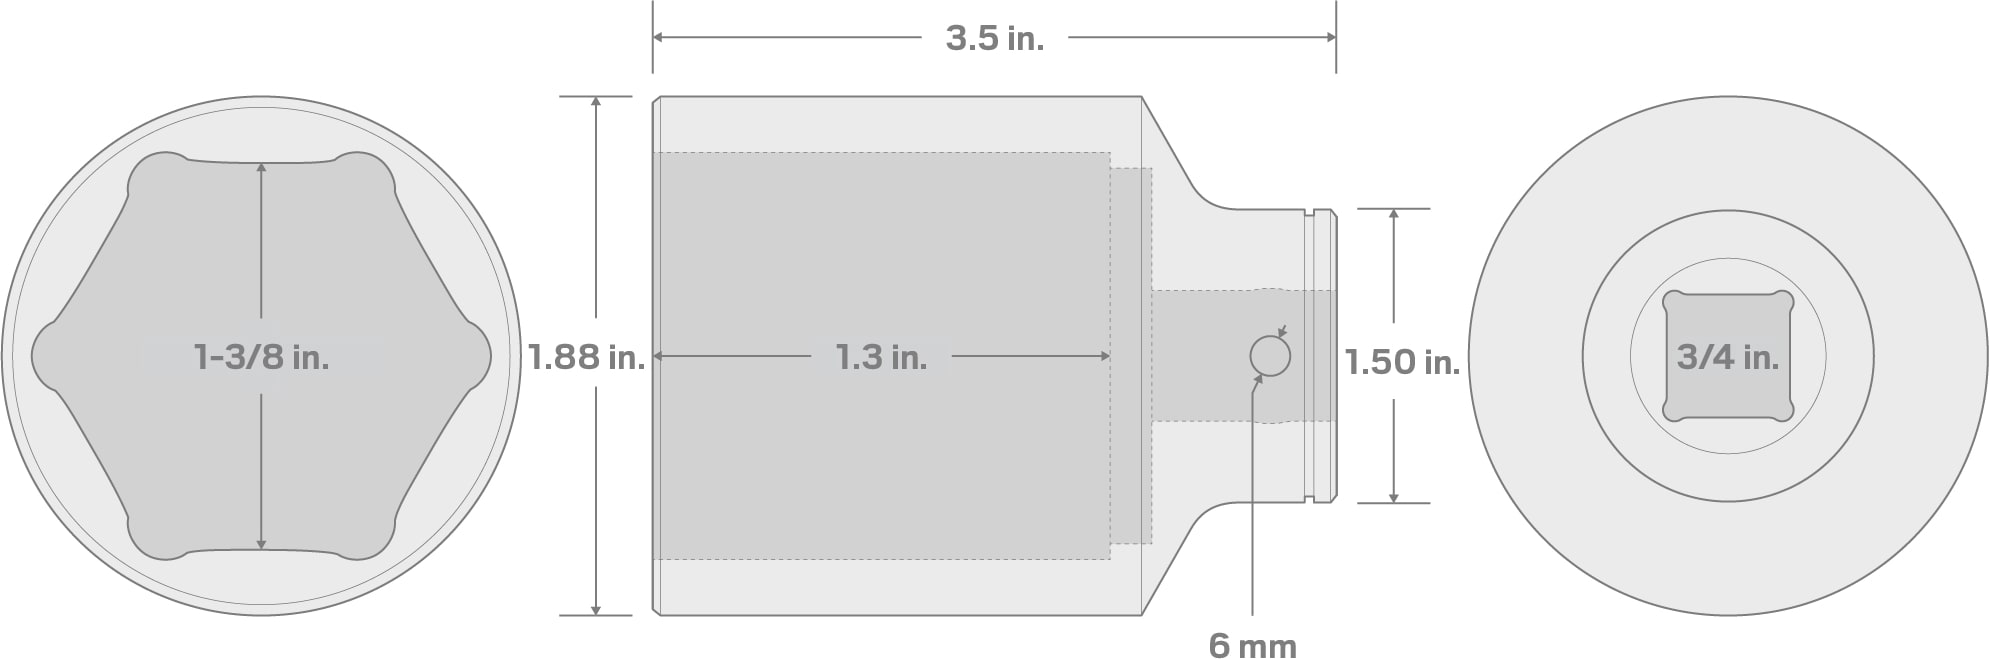 Specs for 3/4 Inch Drive x 1-3/8 Inch Deep 6-Point Socket